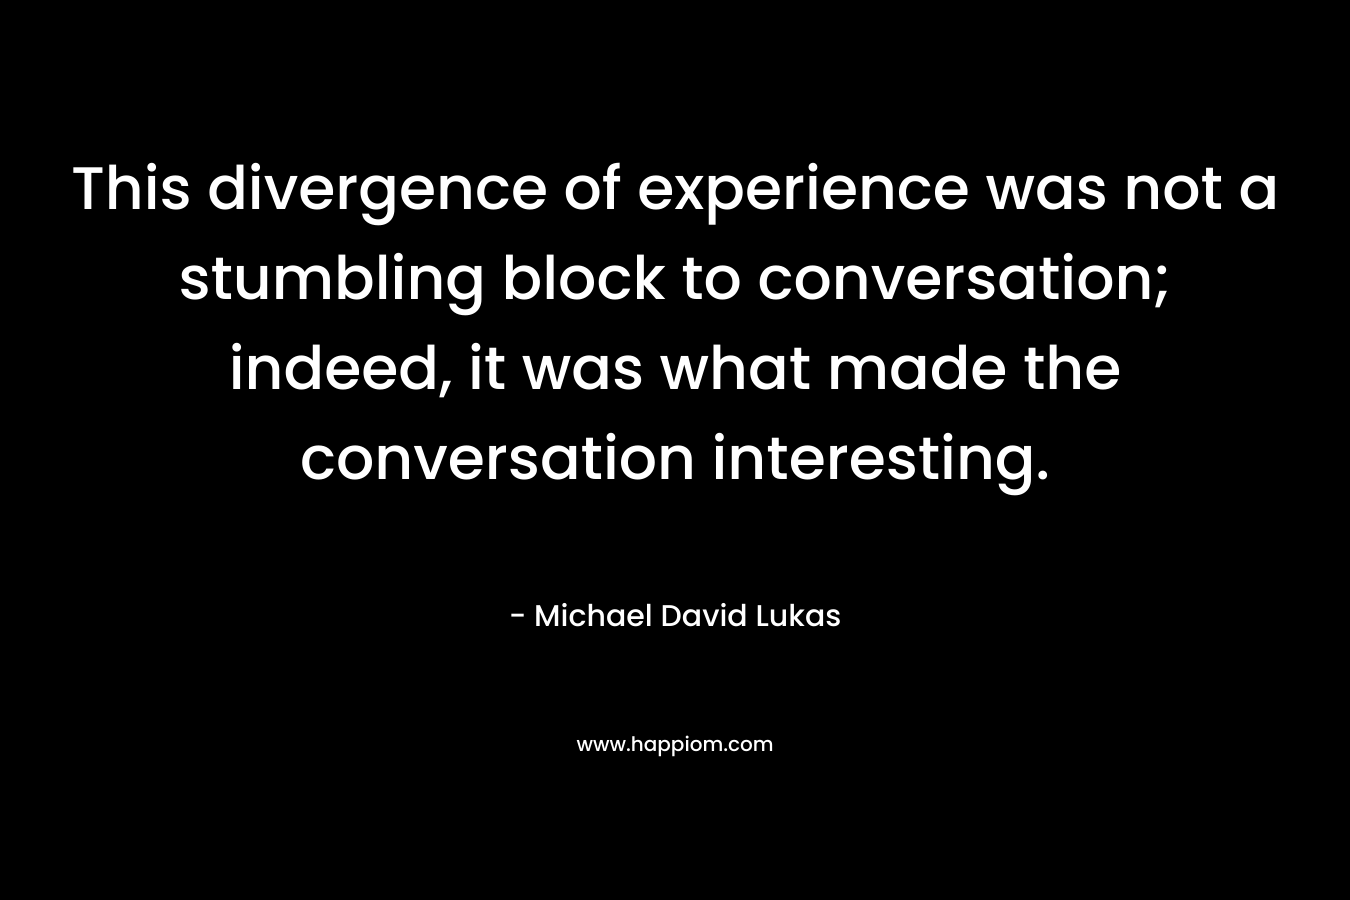 This divergence of experience was not a stumbling block to conversation; indeed, it was what made the conversation interesting. – Michael David Lukas